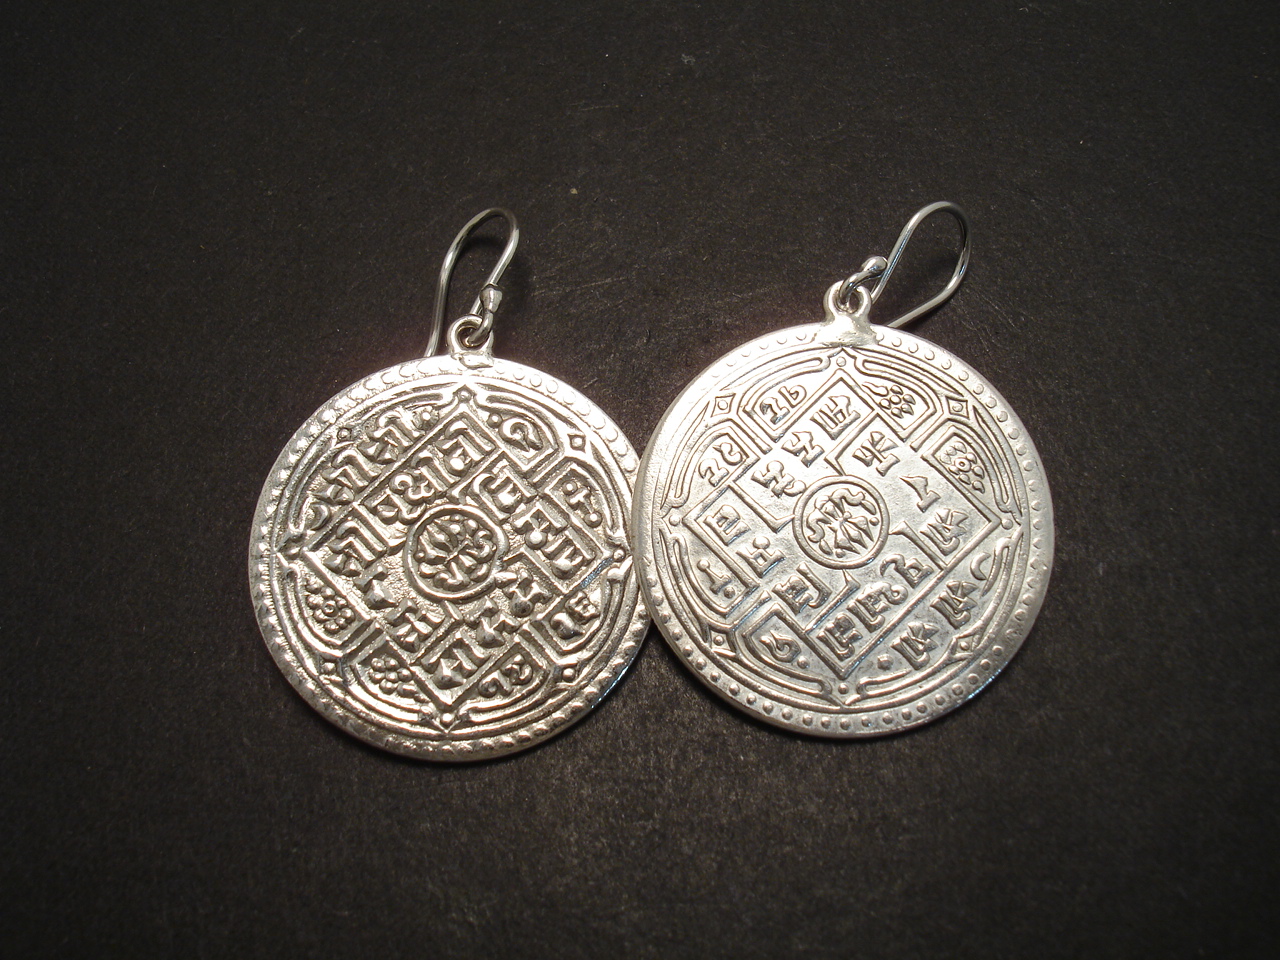 Nepalese Old Silver Coin Earrings - Christopher William Sydney ...